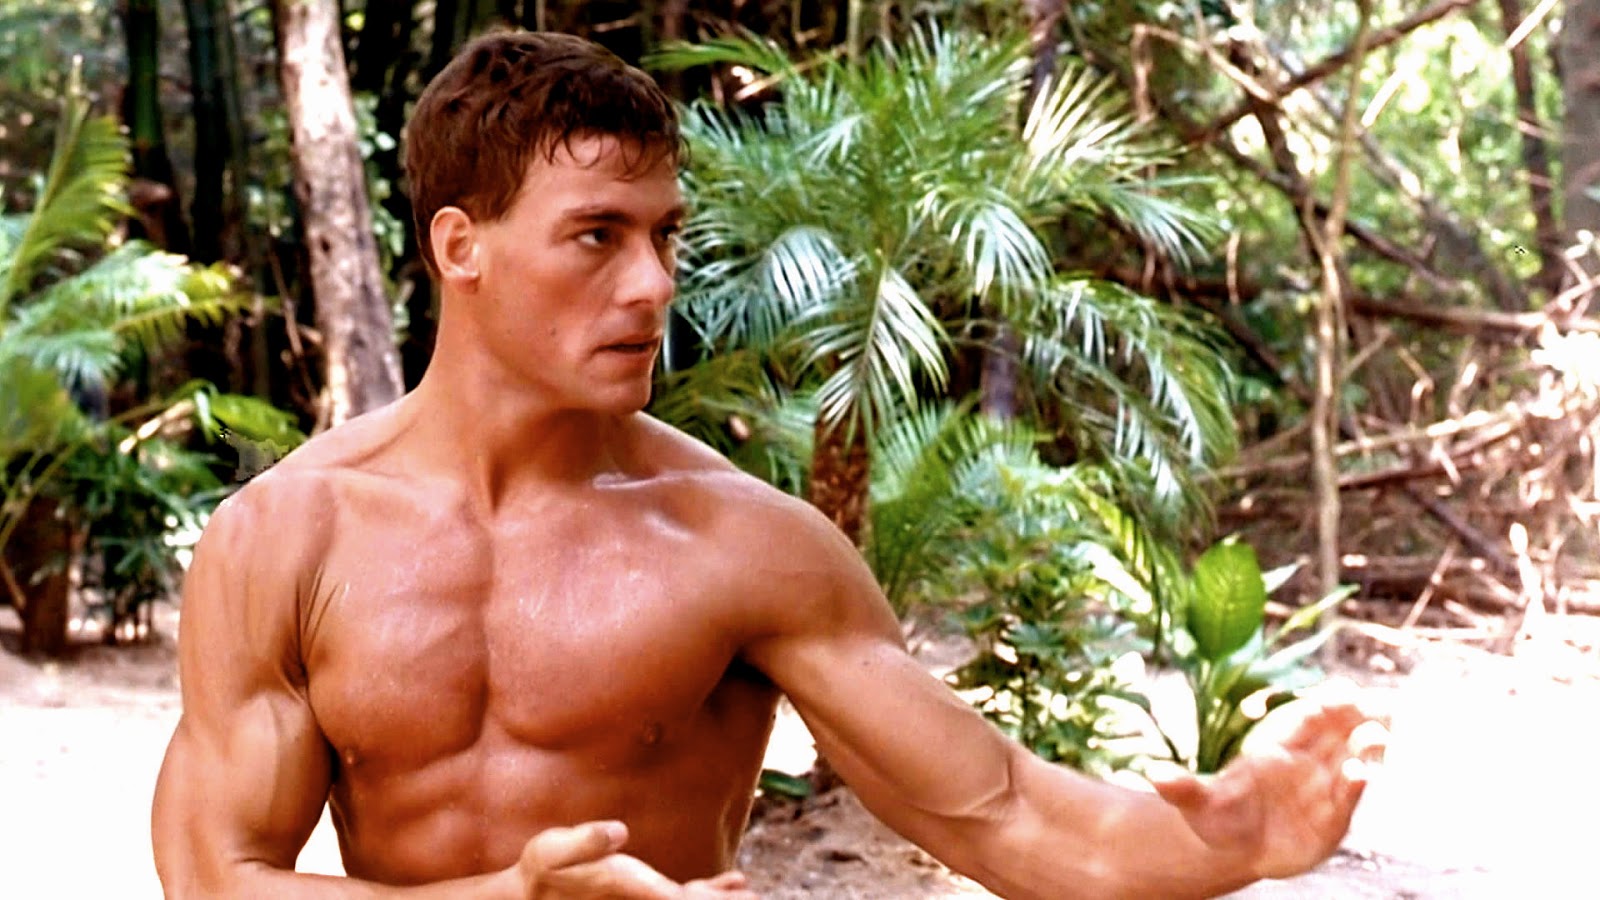 Top 10 Jean Claude Van Damme Movies (fans need to see!)